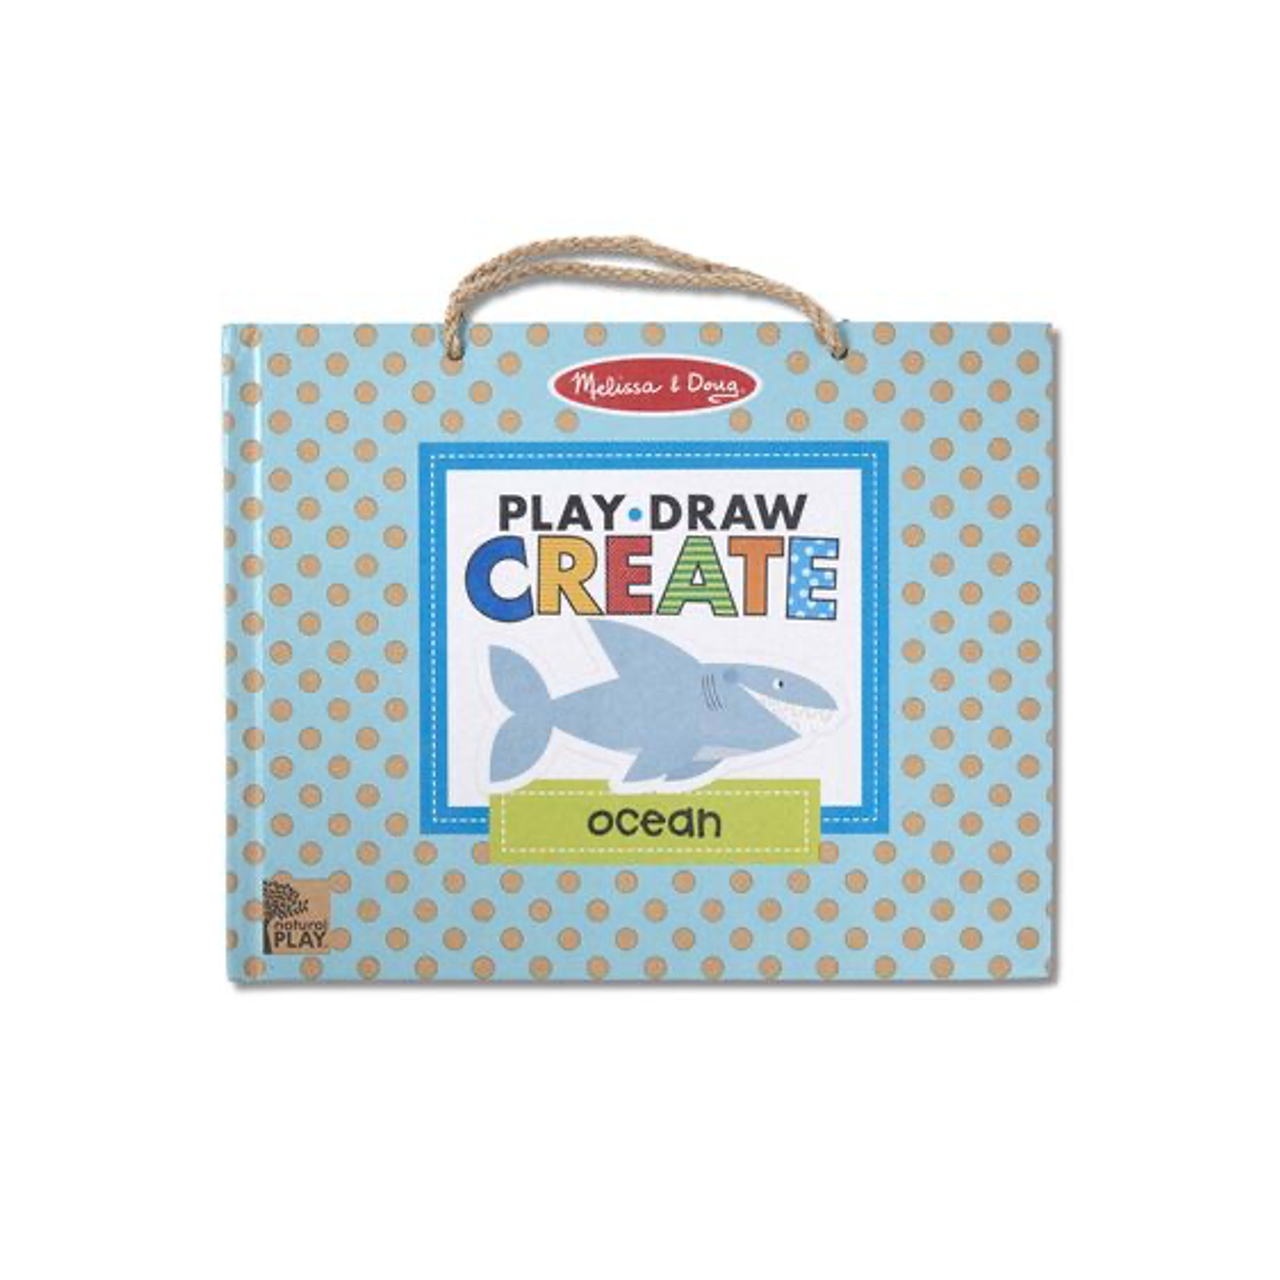 Play, Draw, Create Reusable Drawing & Magnet Kit - Oceans